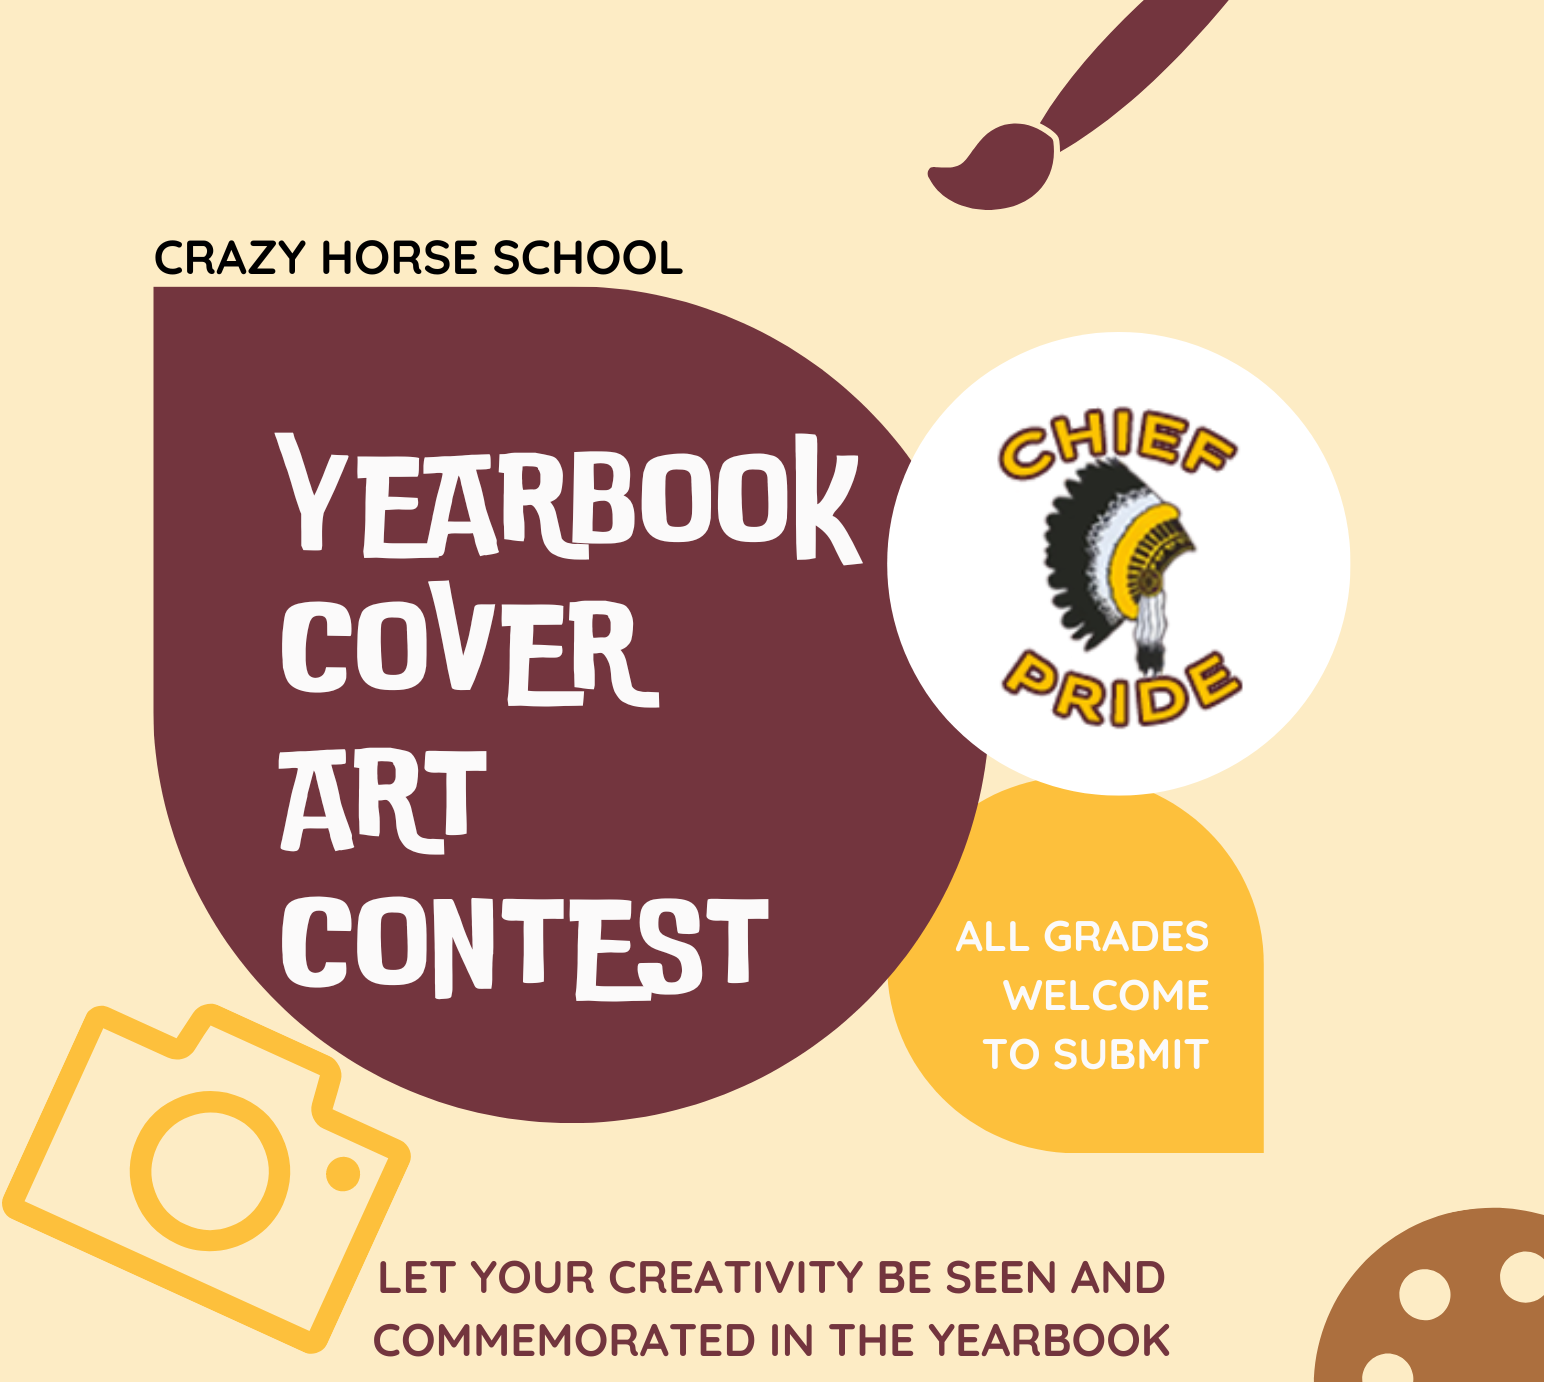 Yearbook Cover Art Contest Let your creativity be seen and commemorated in the Yearbook!